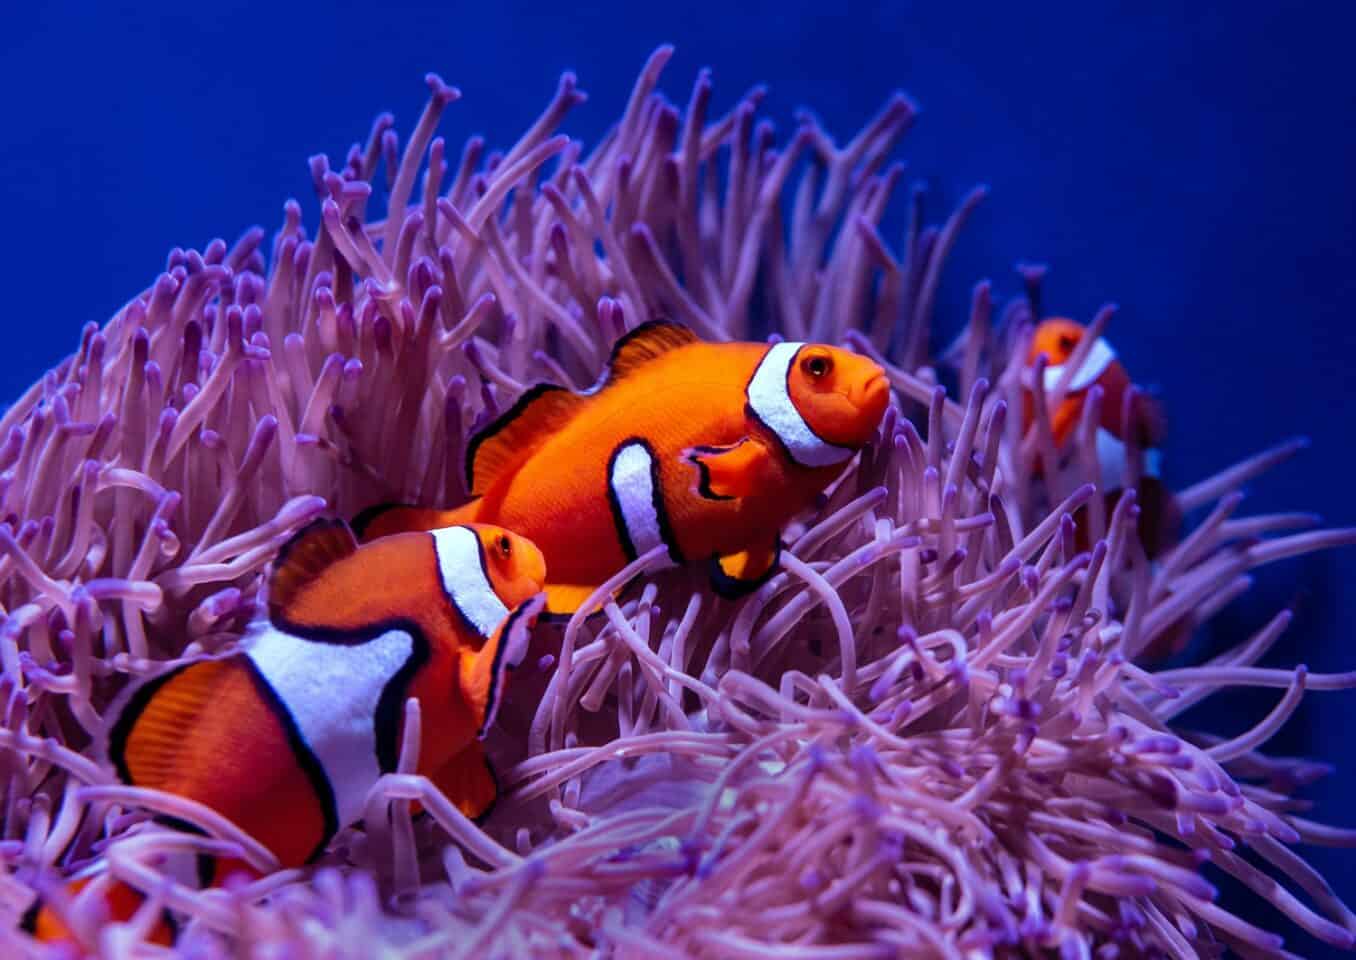 clown fish on anemone in coral reef